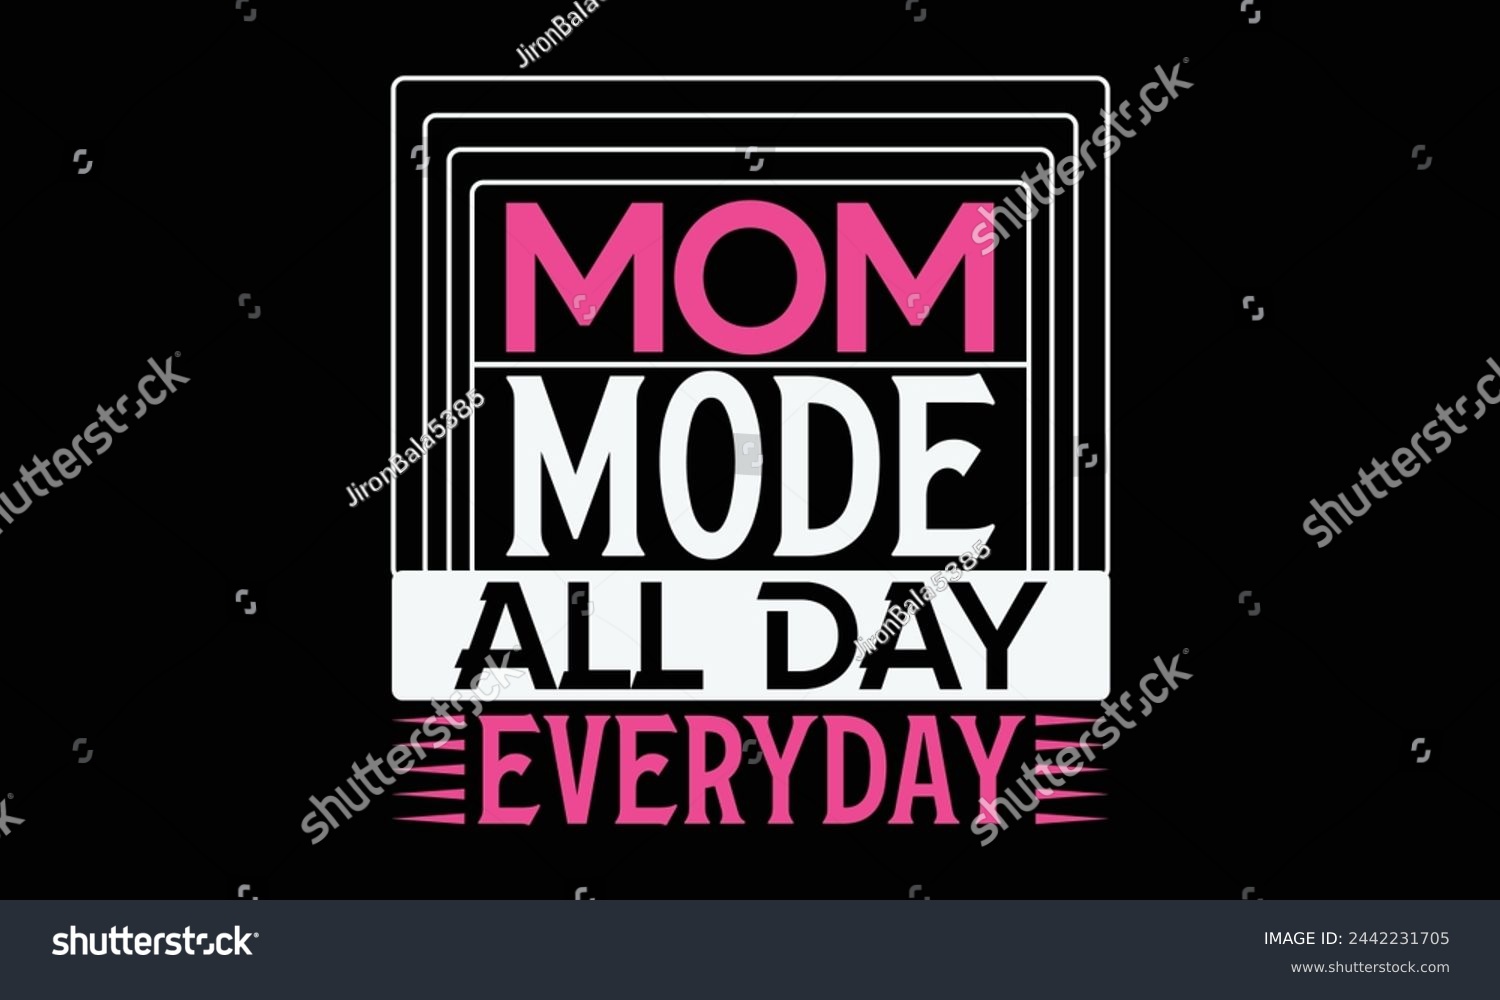 SVG of Mom mode all day everyday - Mom t-shirt design, isolated on white background, this illustration can be used as a print on t-shirts and bags, cover book, template, stationary or as a poster. svg